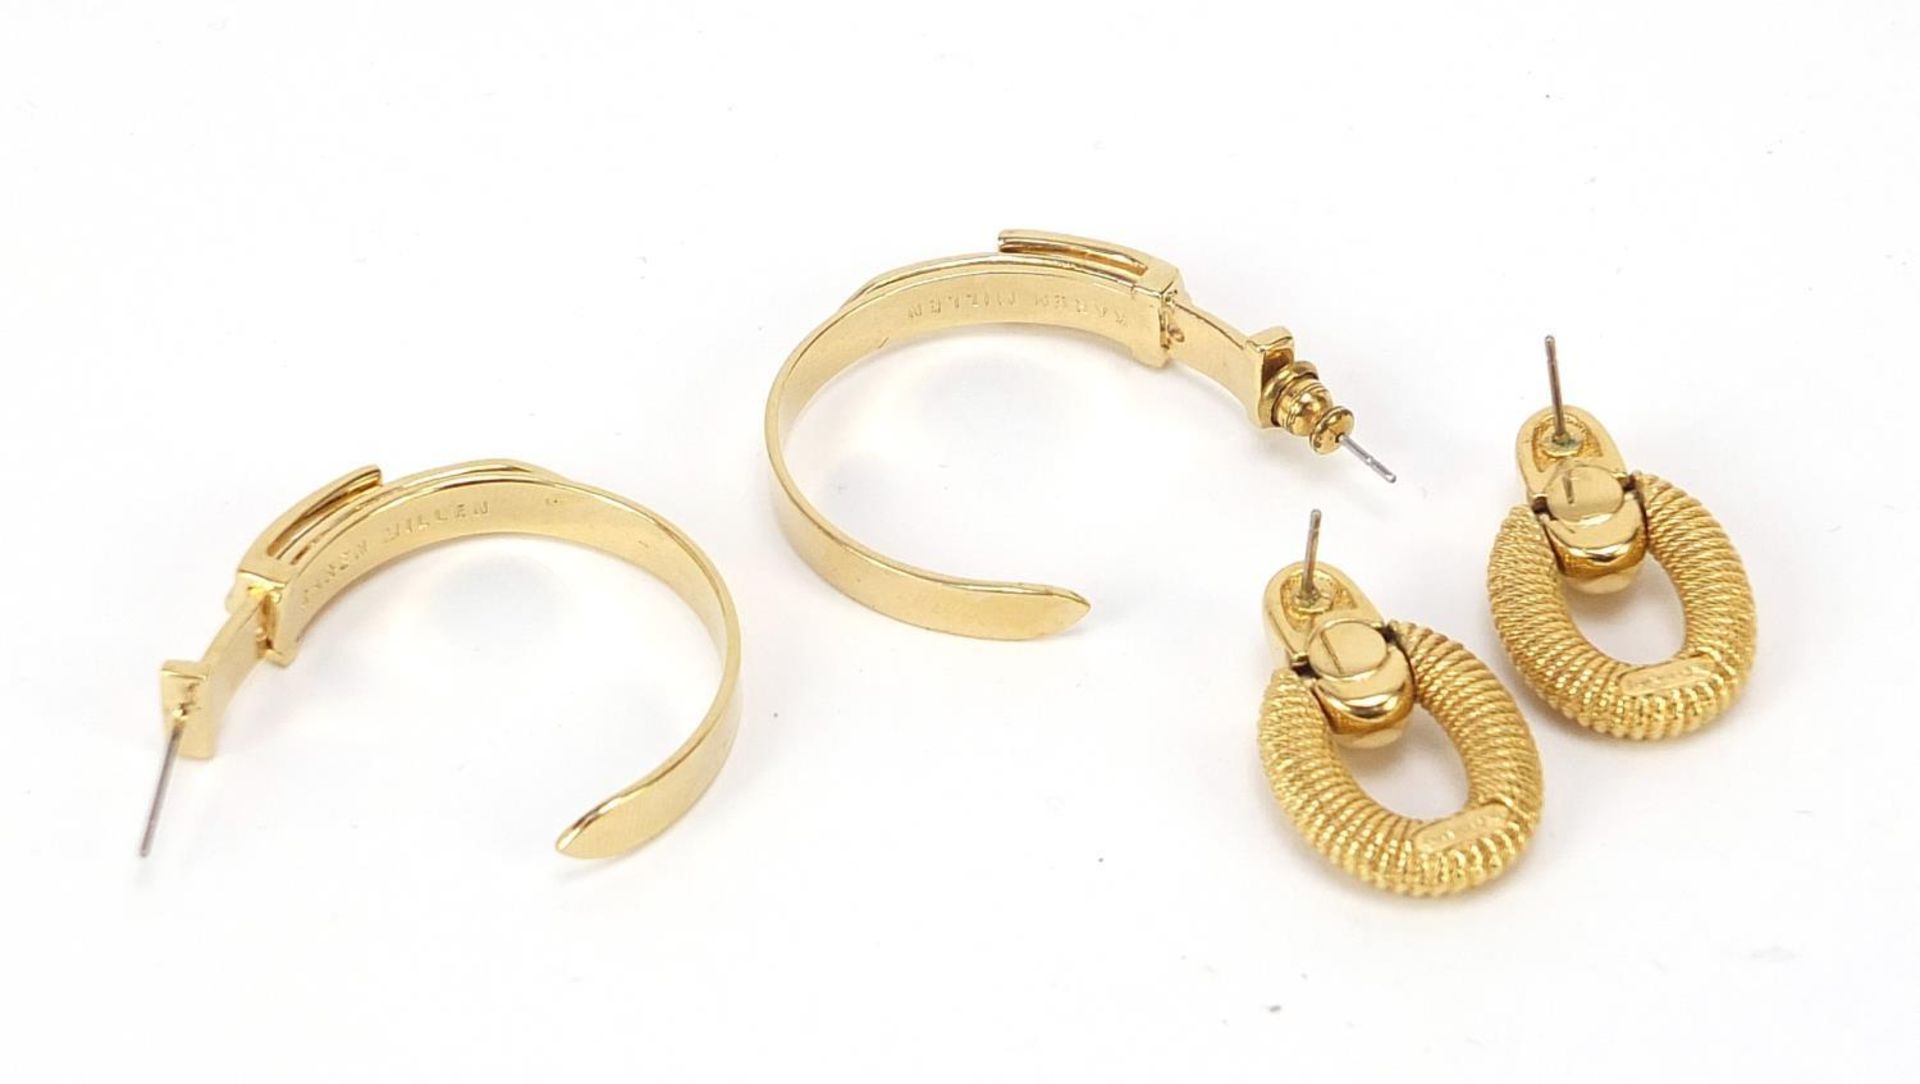 Two pairs of designer earrings by Burberrys and Karen Millen, 3.5cm and 2.5cm high - Image 4 of 6